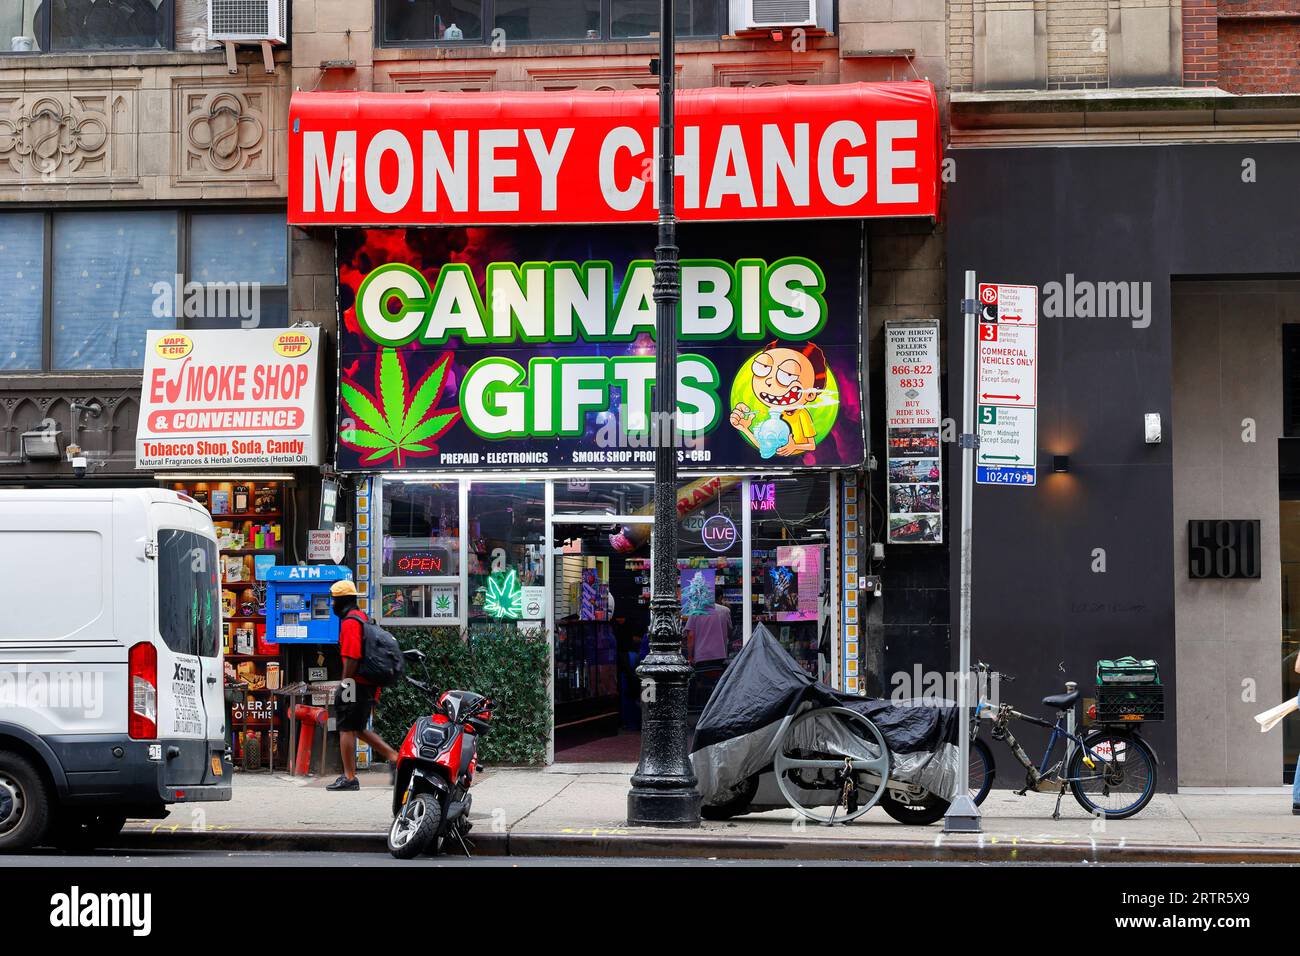 A unlicensed cannabis store with a money changer awning on top, in Times Square, New York City Stock Photo